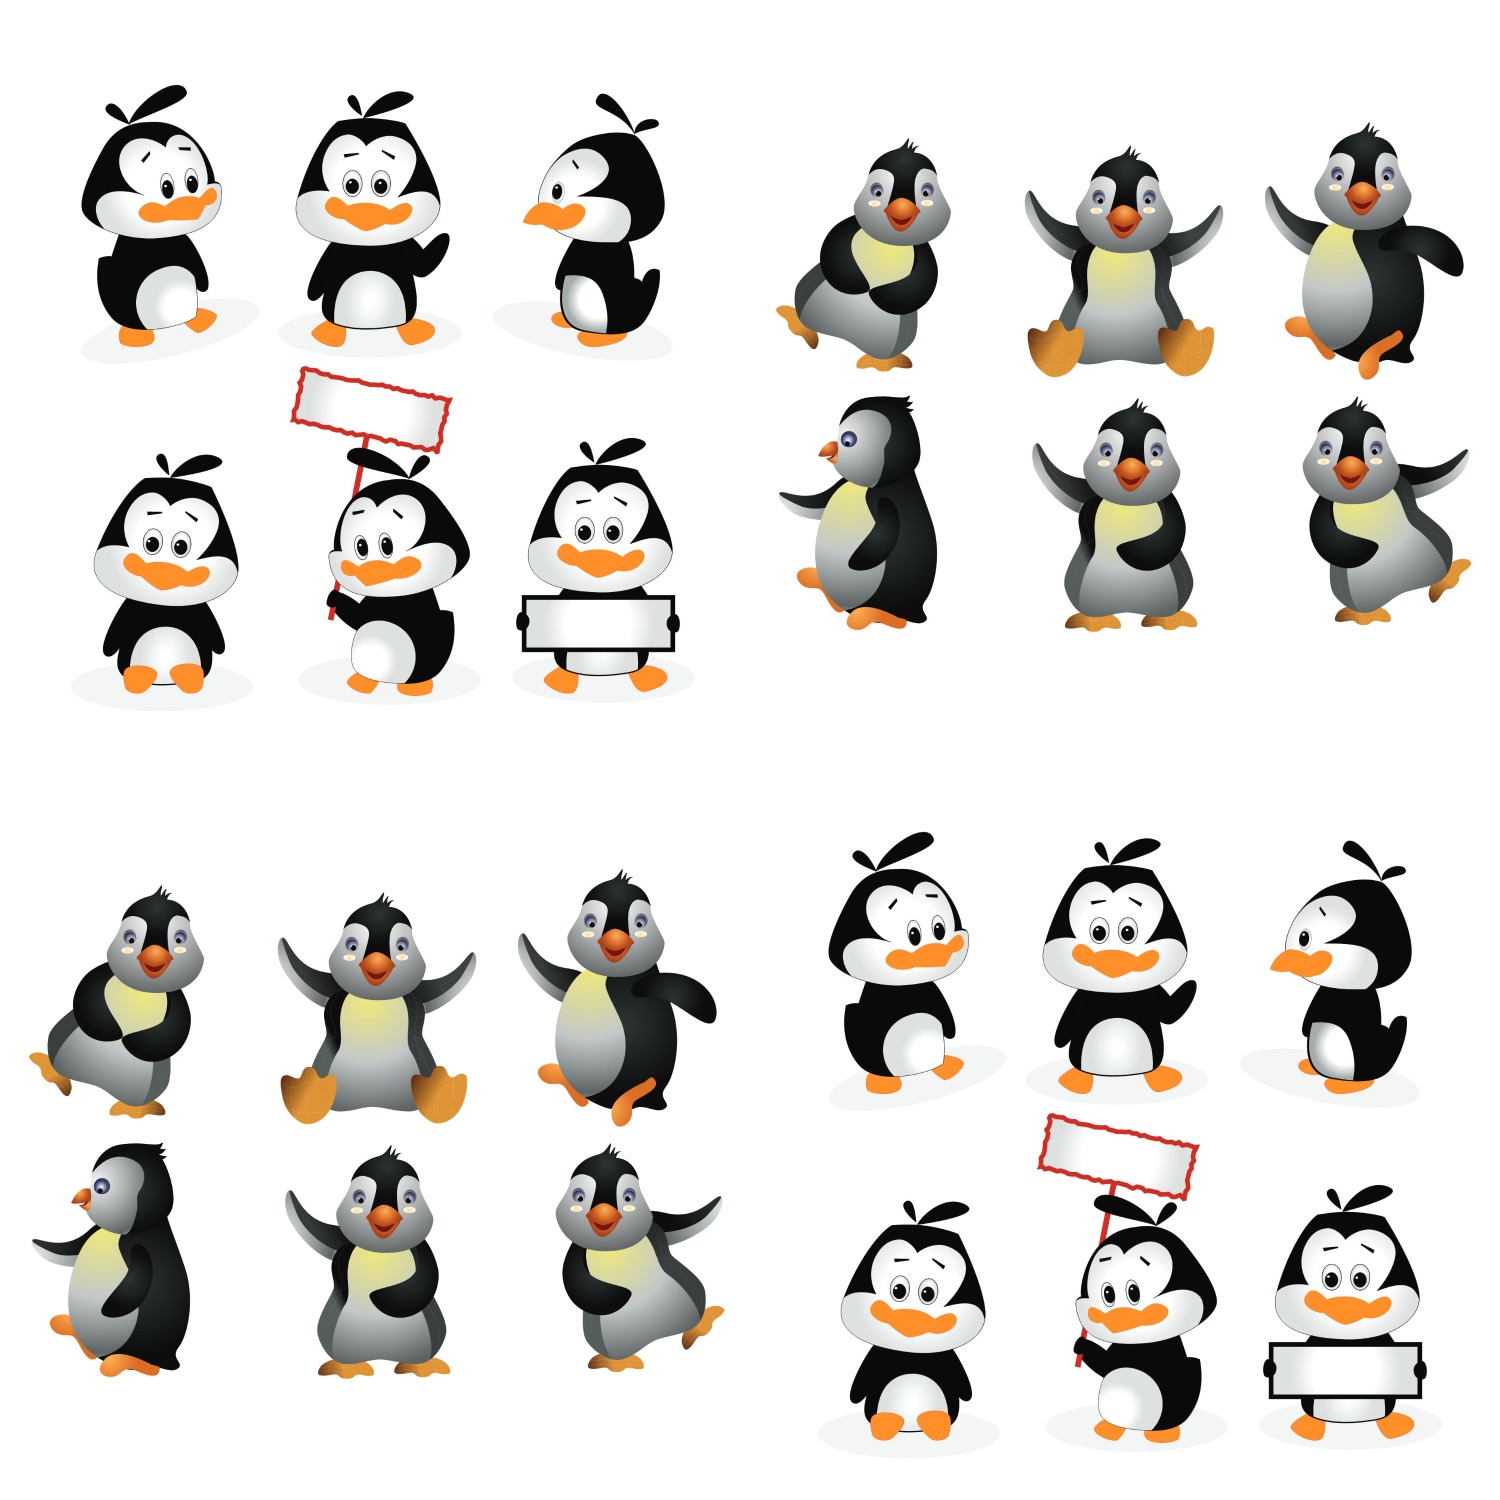 6,586 Cute Penguin Clipart Royalty-Free Photos and Stock Images |  Shutterstock